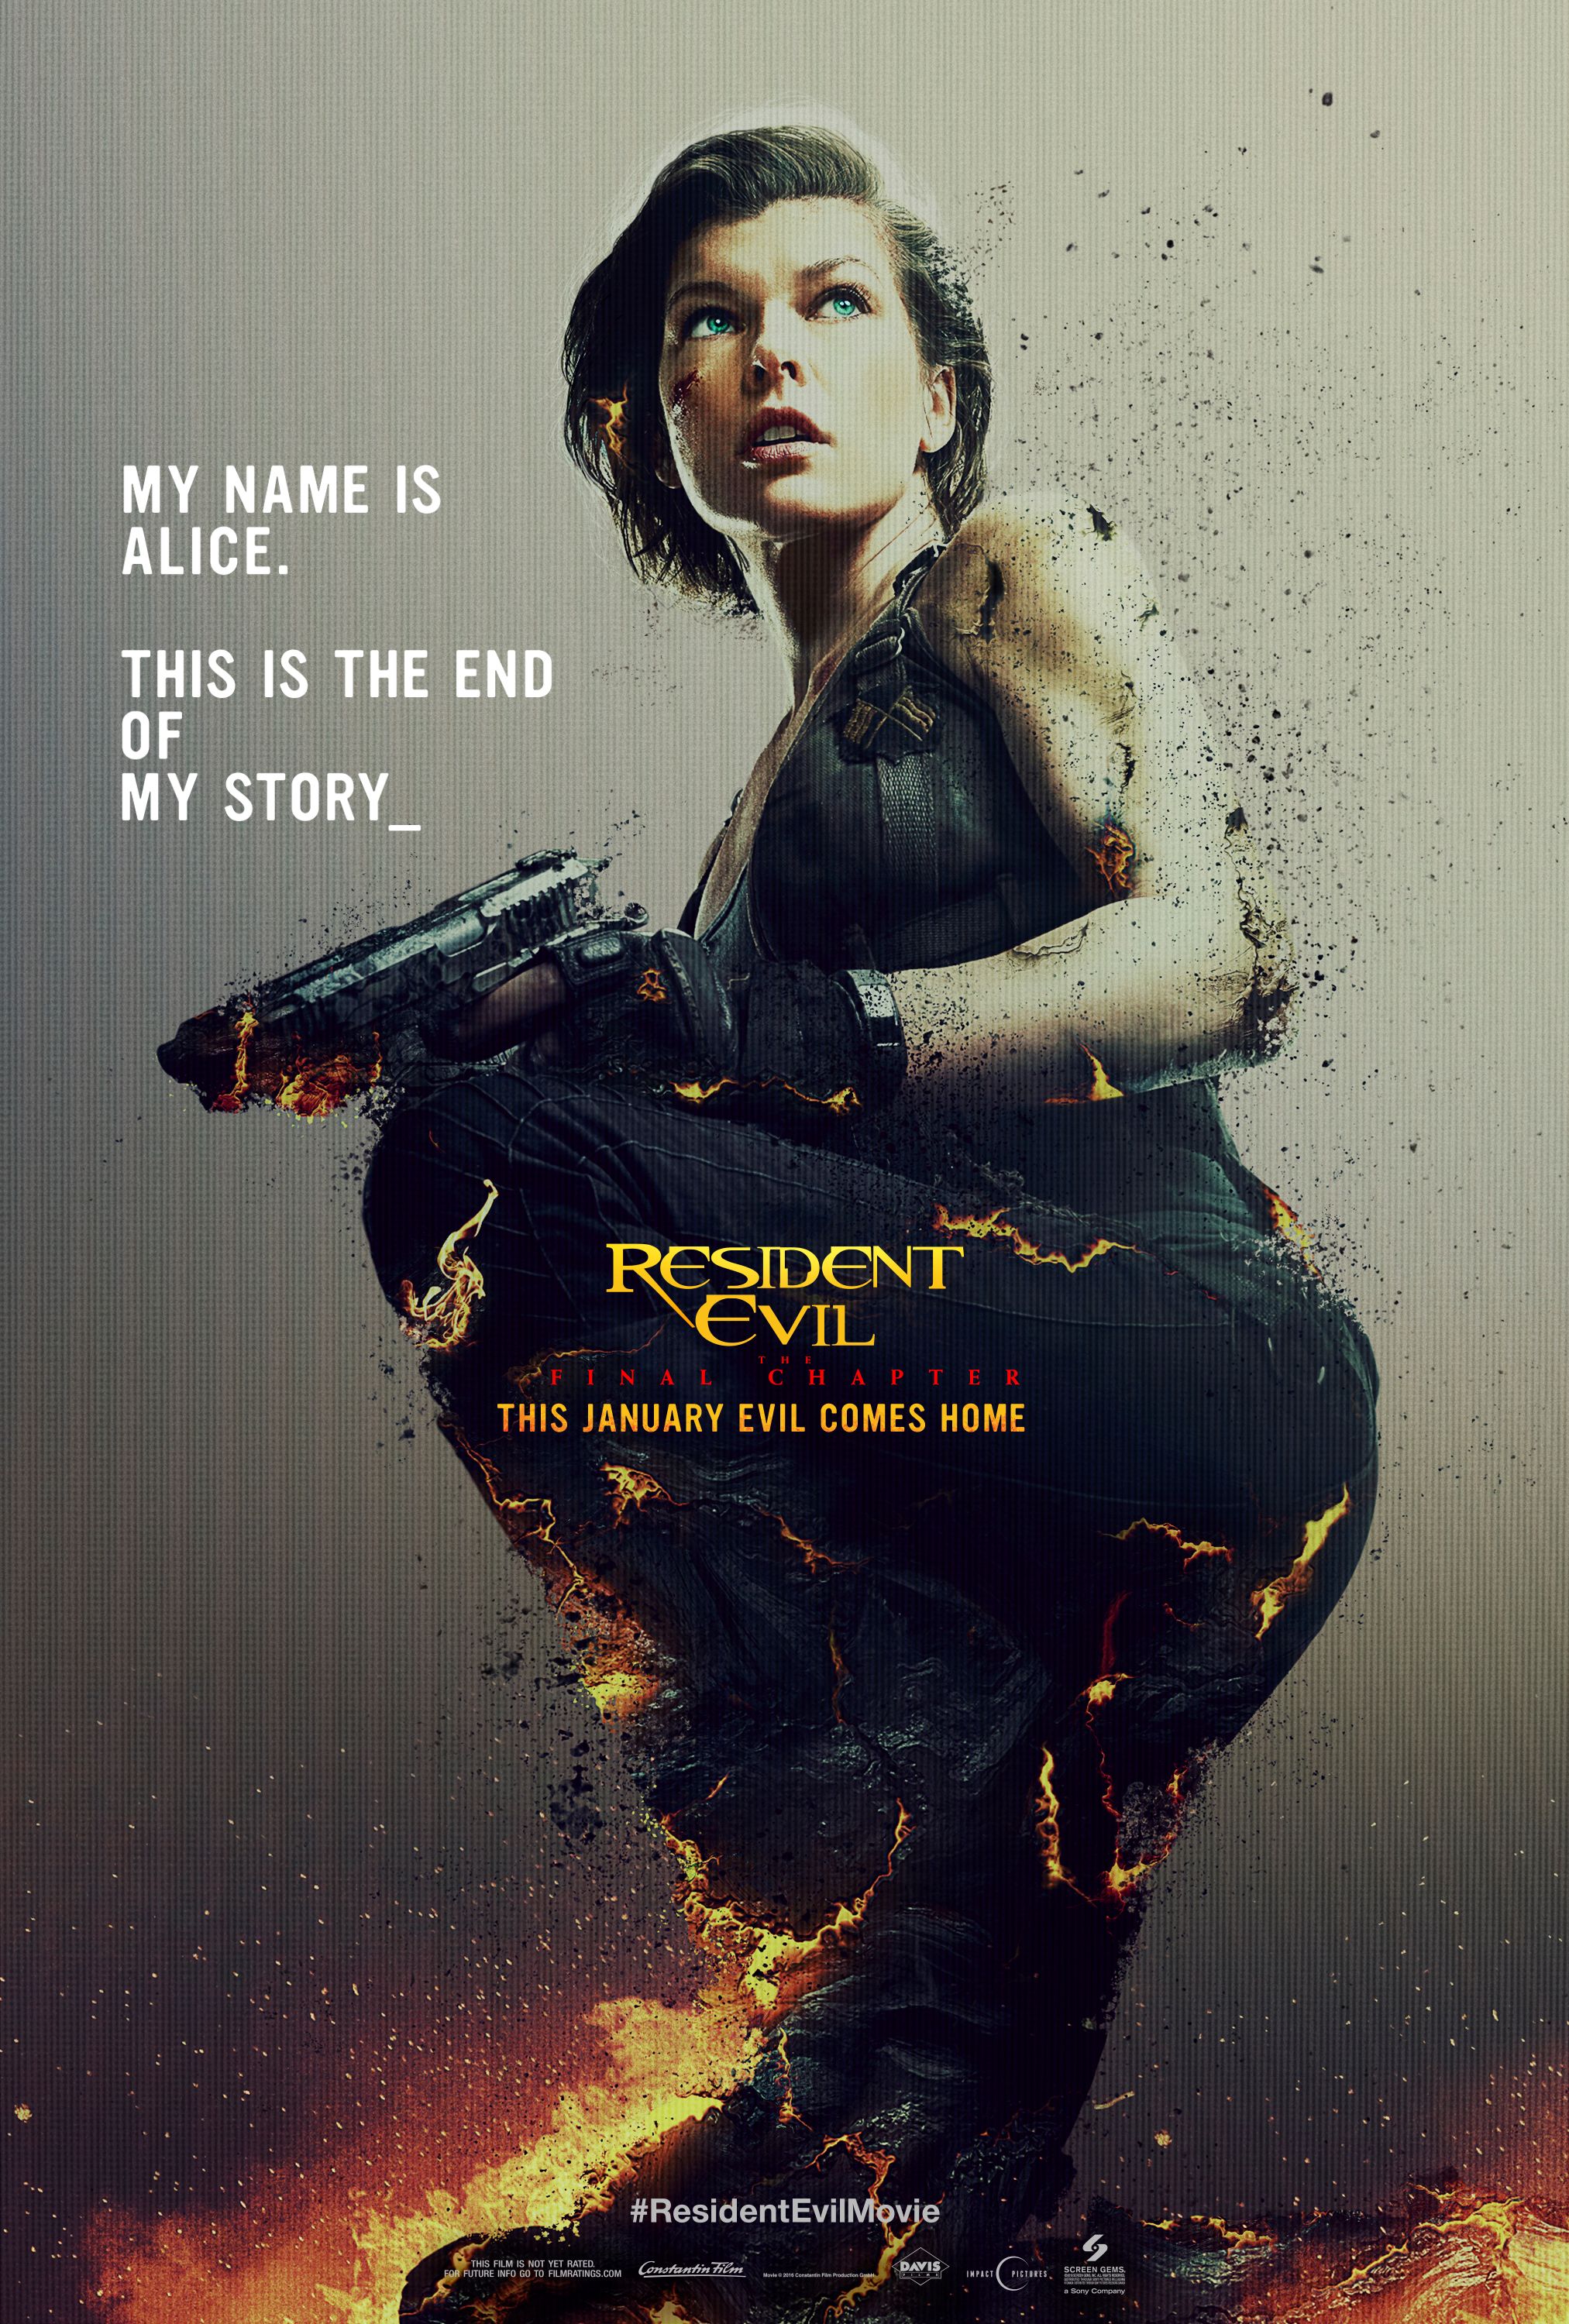 Resident Evil 6: The Final Chapter FAQ - Everything We Know So Far